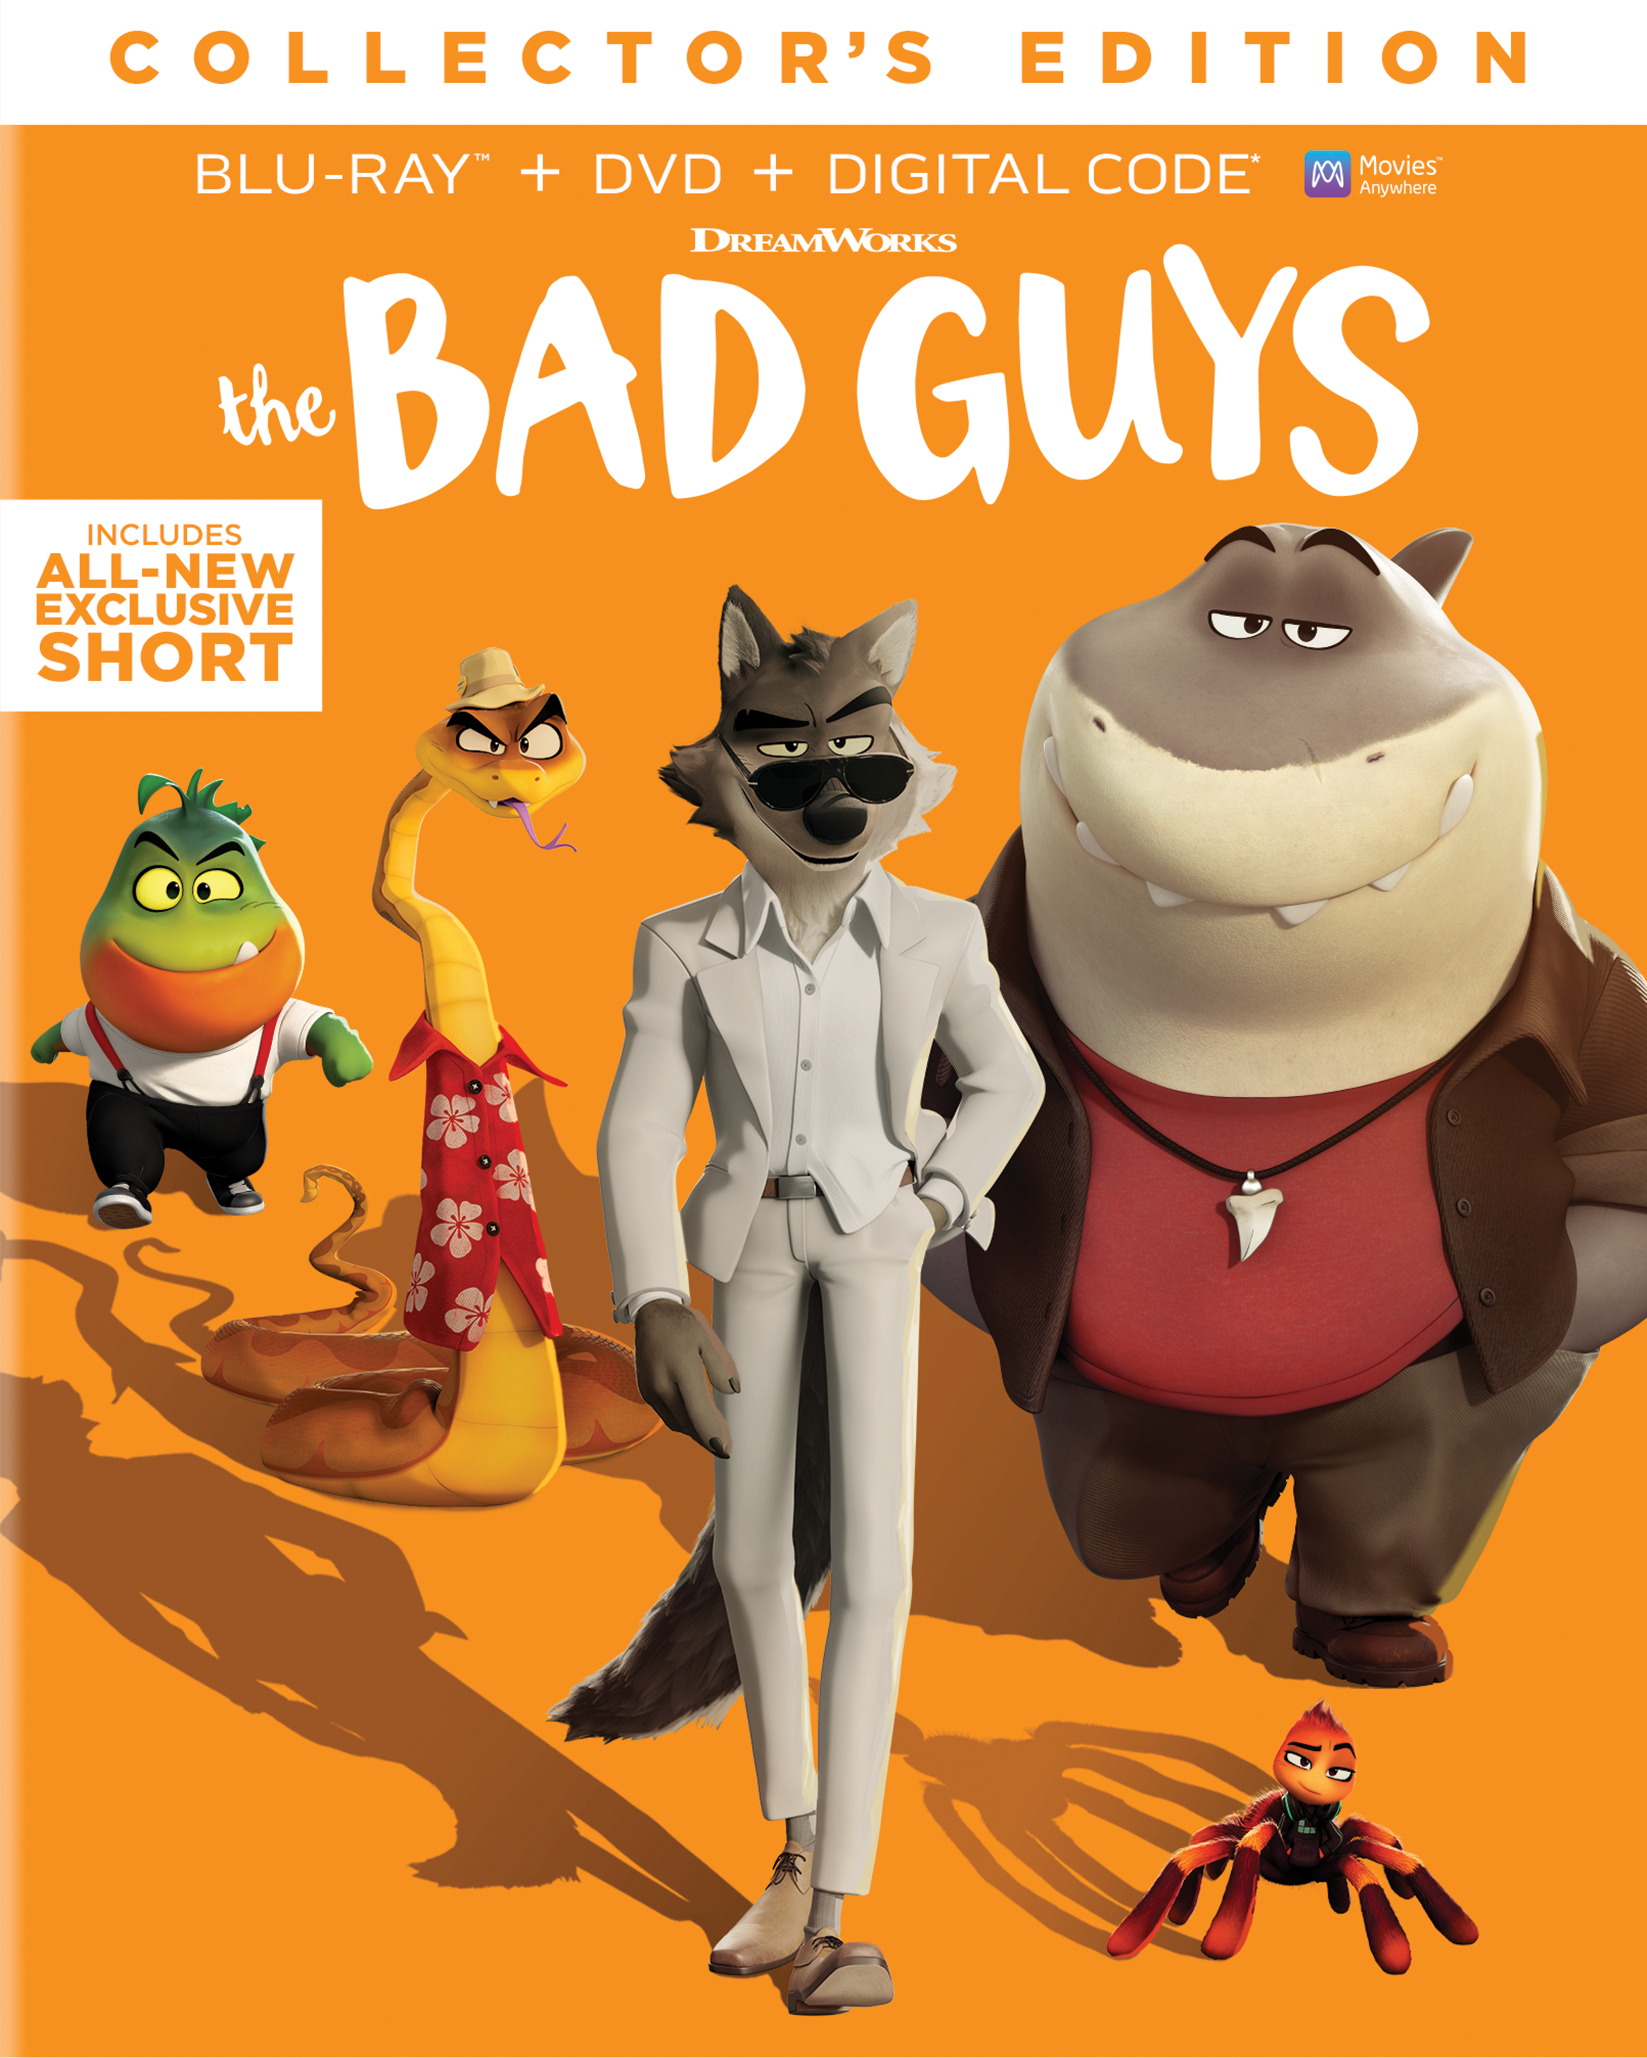 The Bad Guys is Now Available on 4K Ultra HD, BluRay, DVD, and Digital